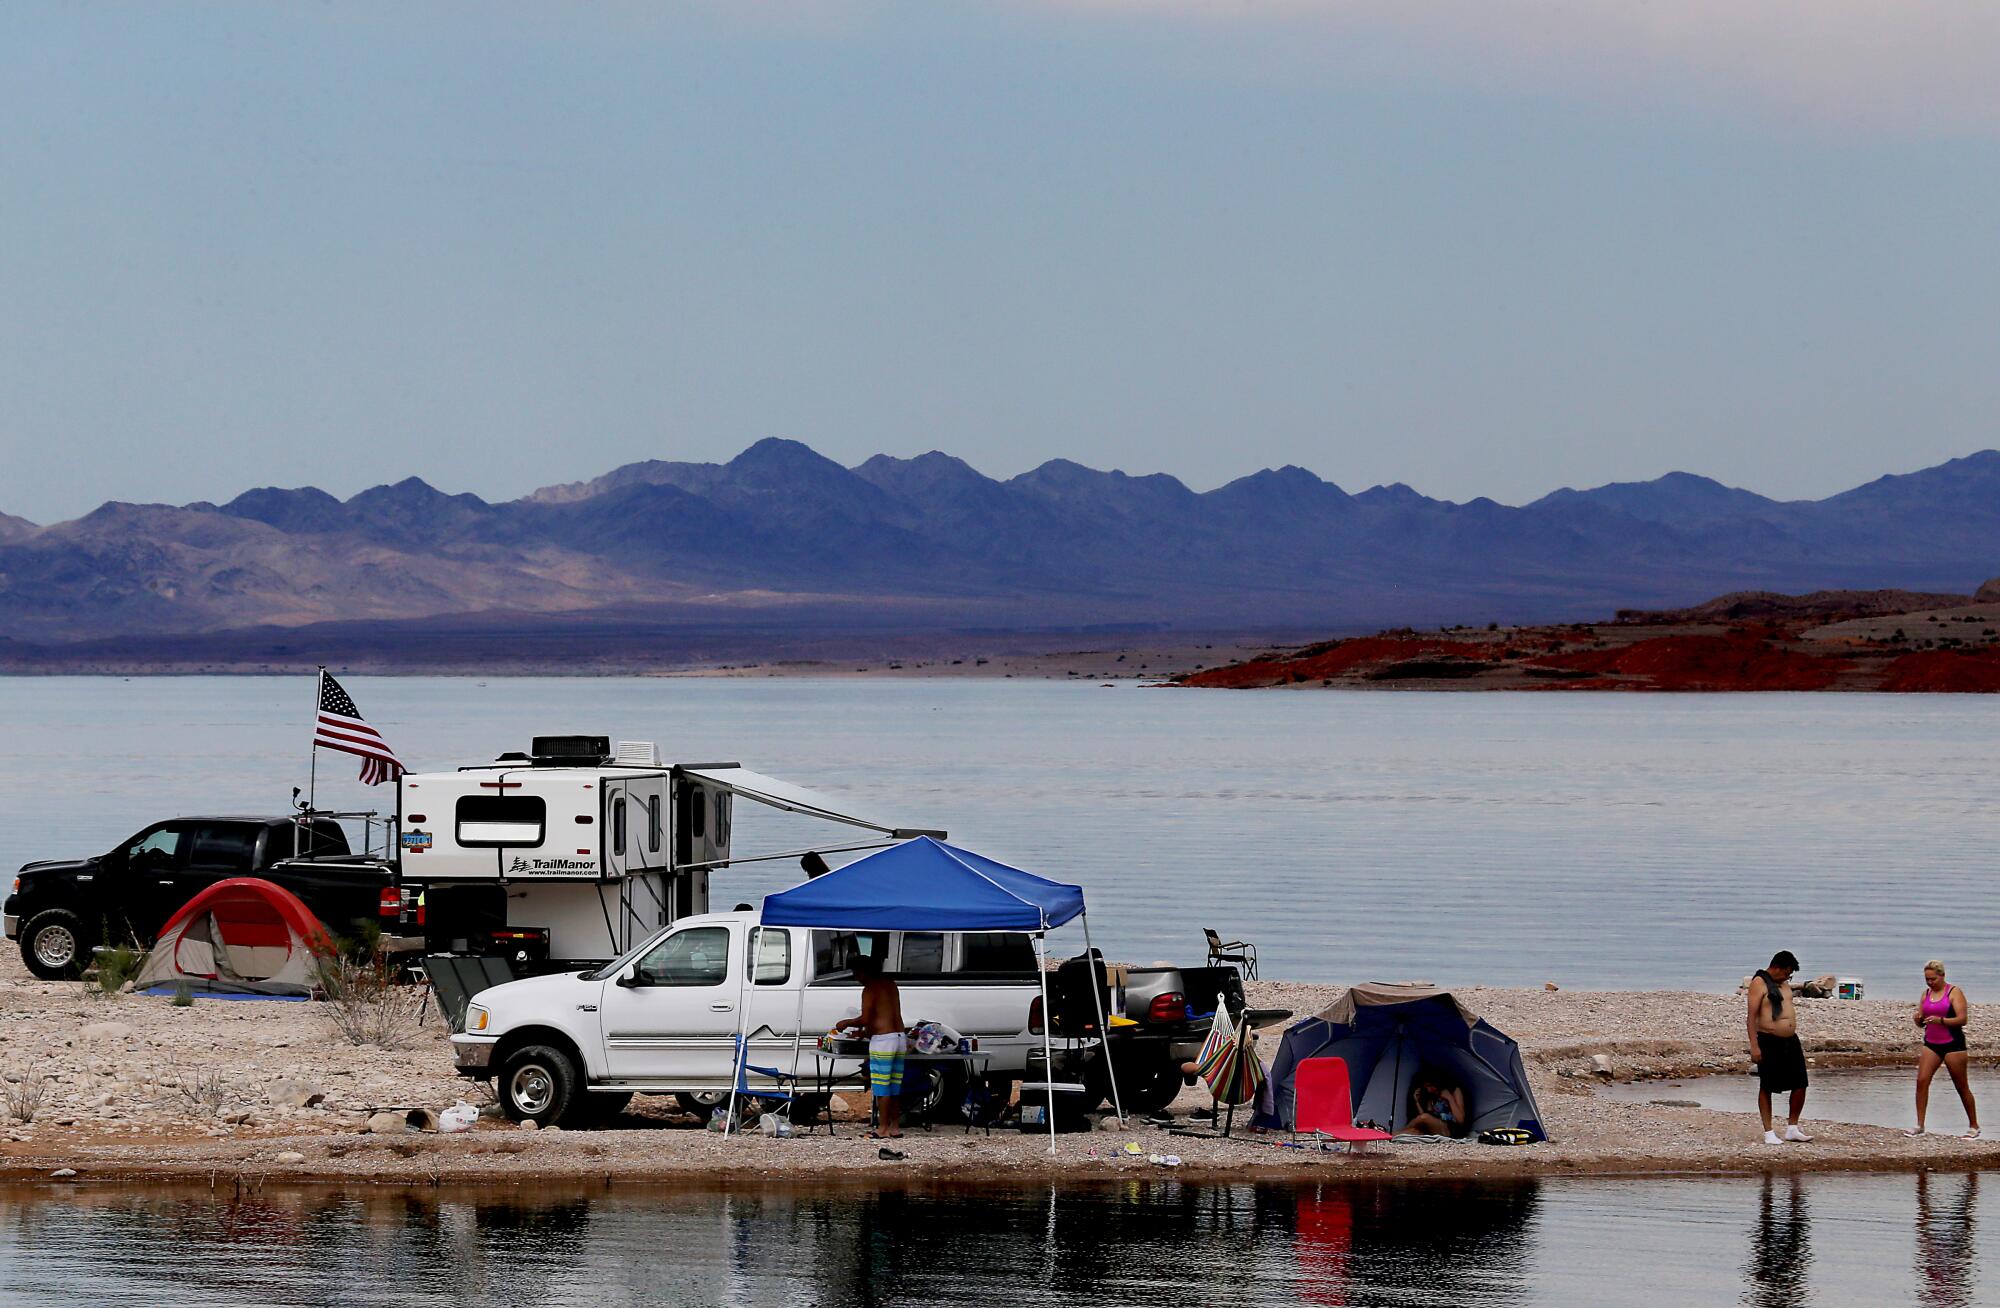 Campers set up on the shore of Lake Mead.